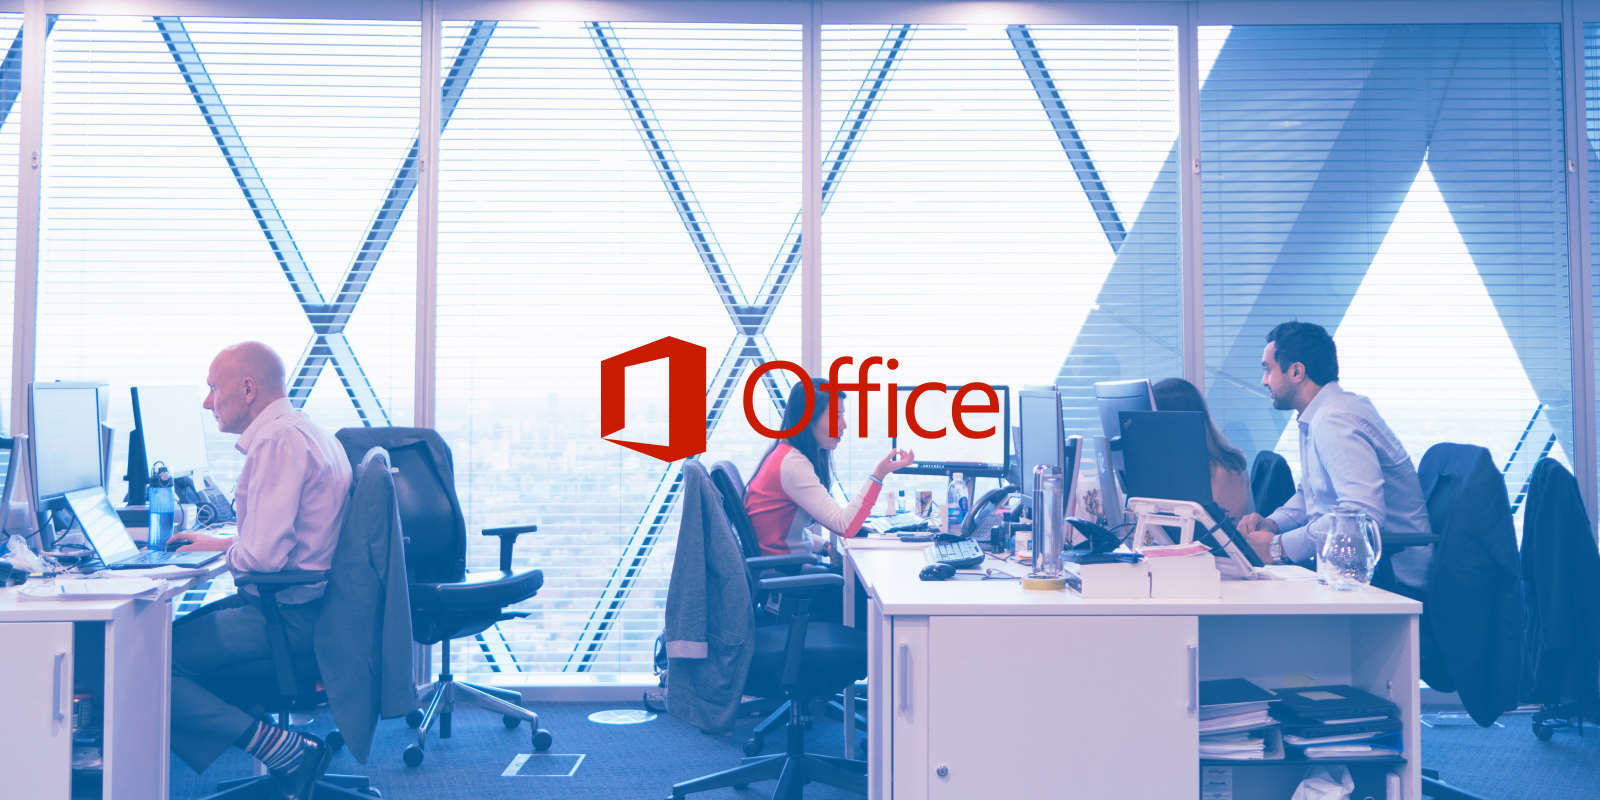 say-goodbye-to-subscription-fees-get-microsoft-office-apps-forever-for-just-30